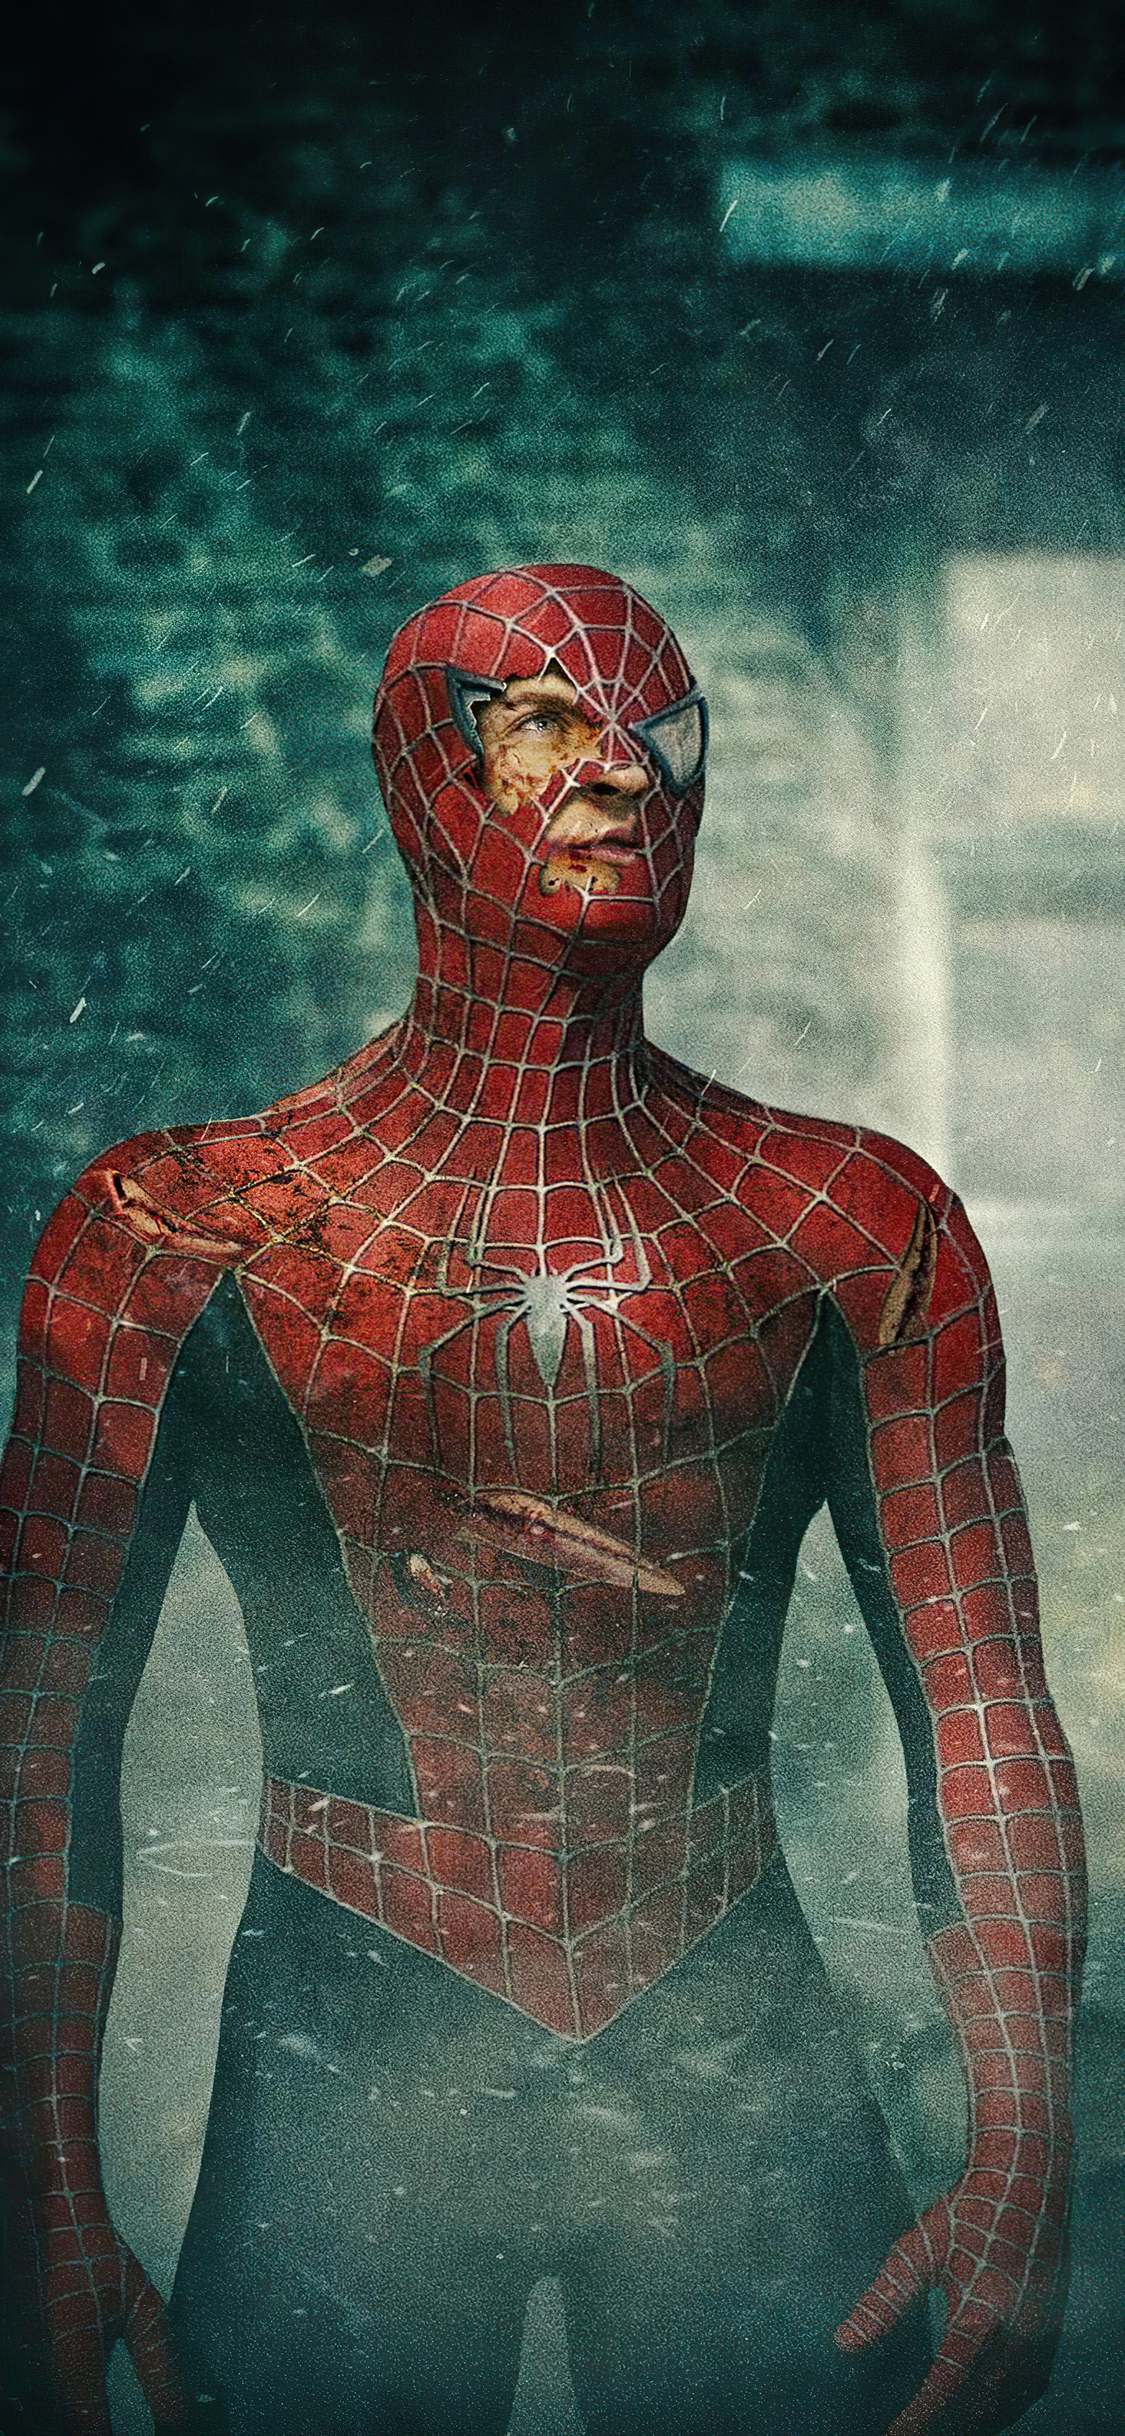 15 Amazing Spider-Man wallpapers for iPhone in 2023 (Free download) -  iGeeksBlog